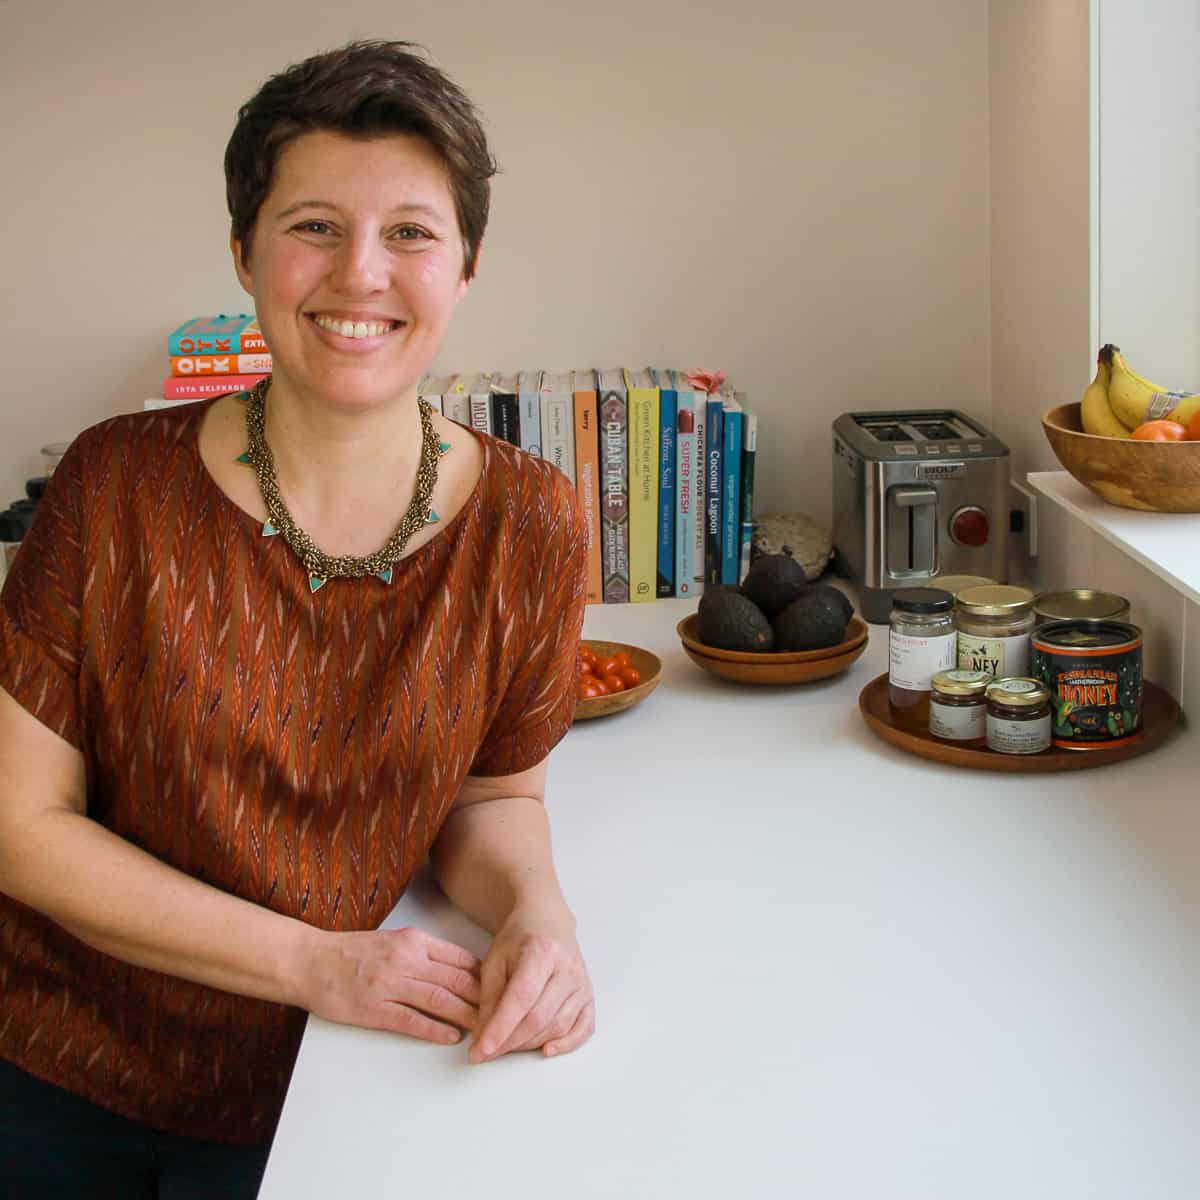 An image of Dara Gellman, the author of the daraeats website